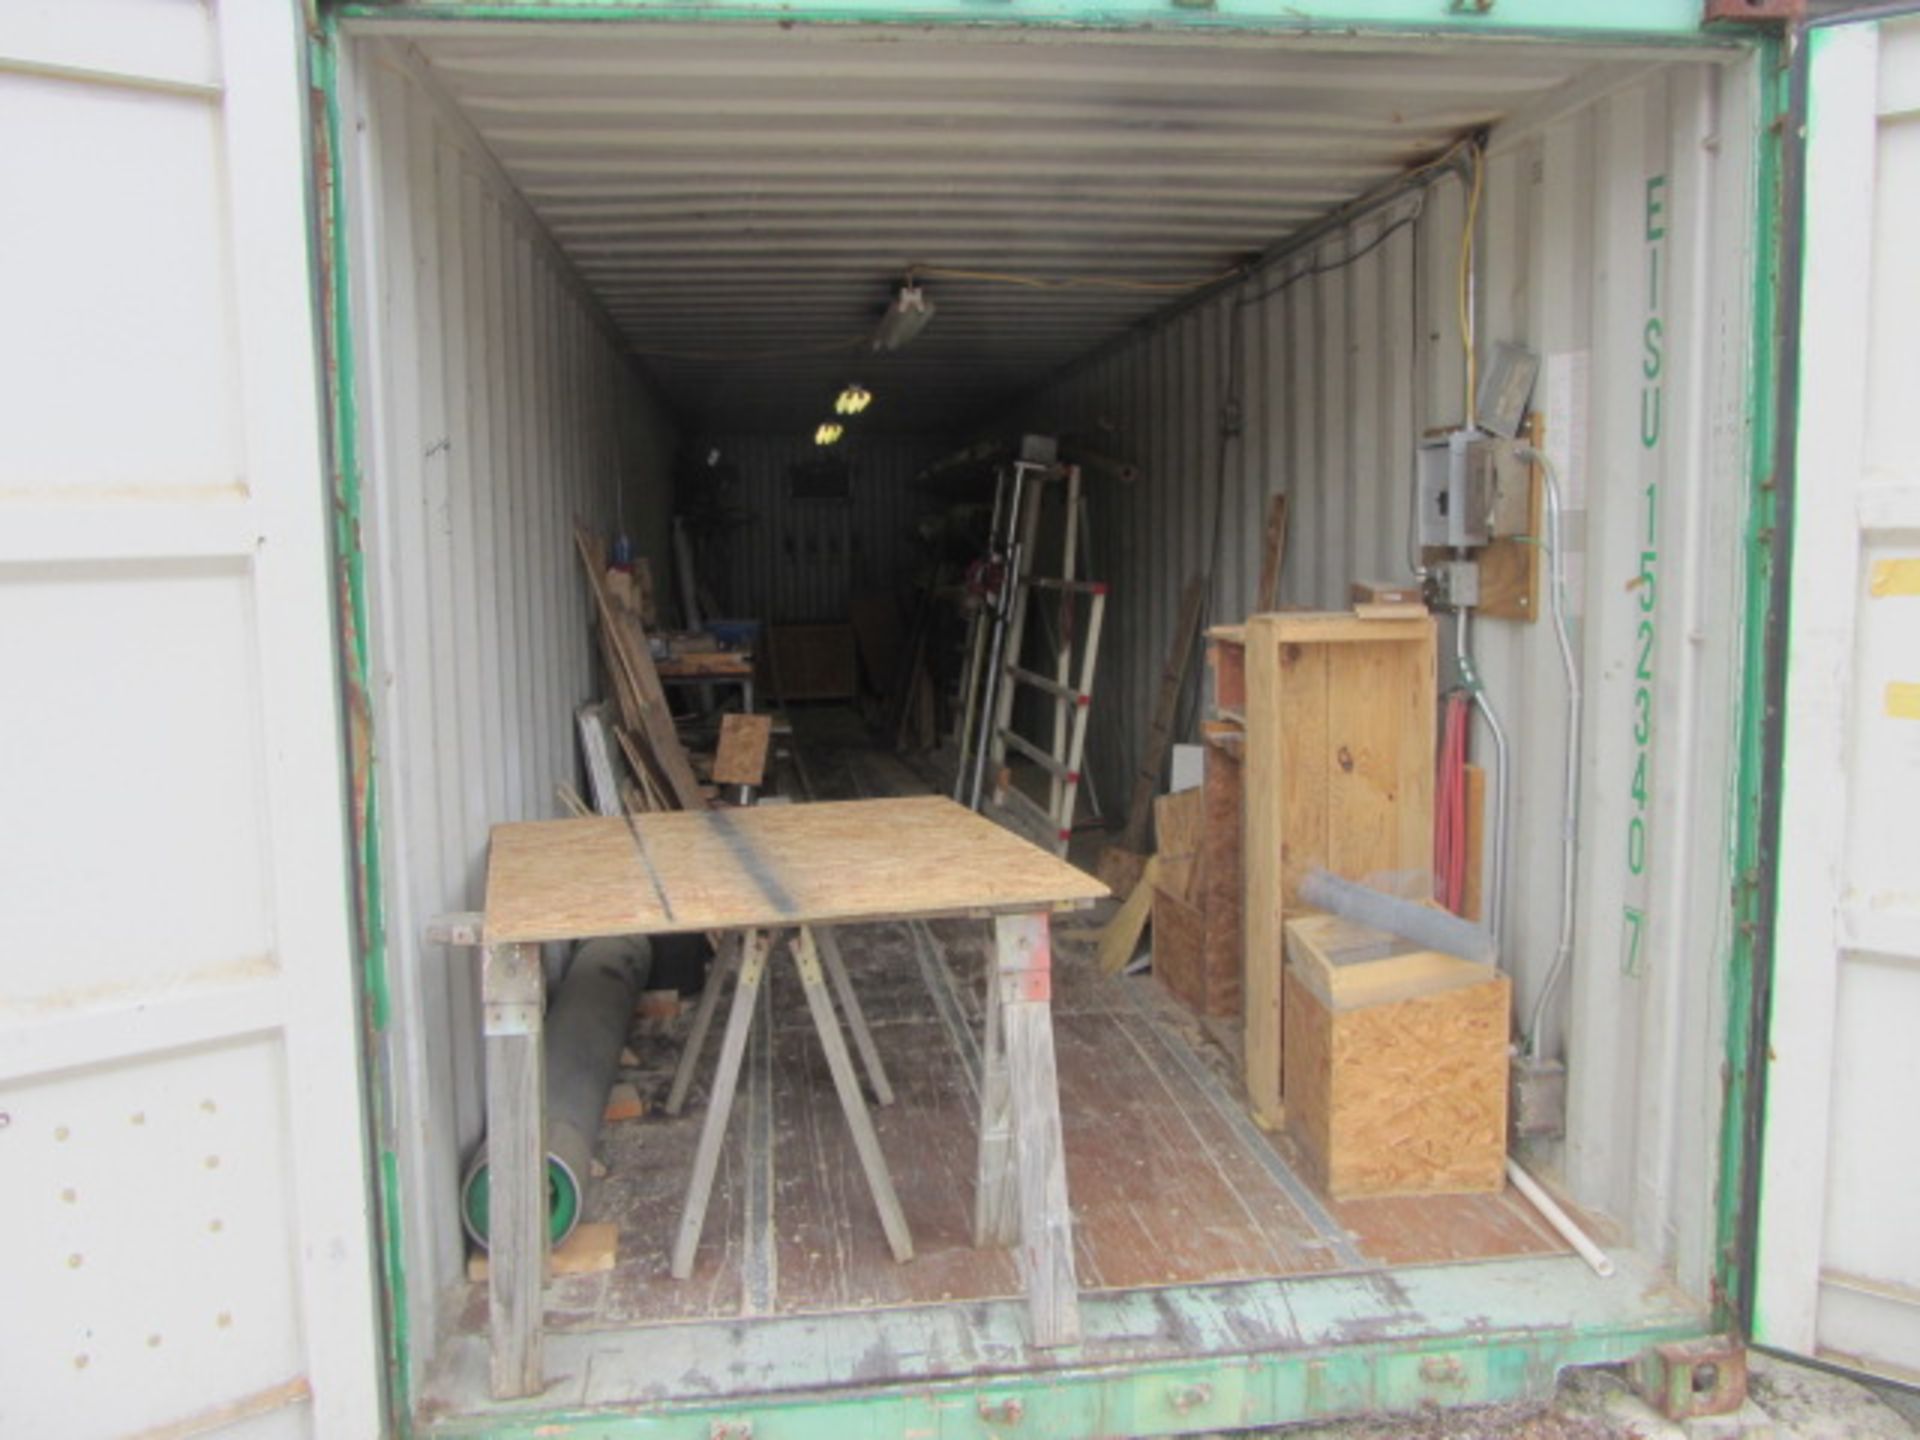 8' x 40' Storage Container converted into Woodshop with Electricity, Racking & Filtration